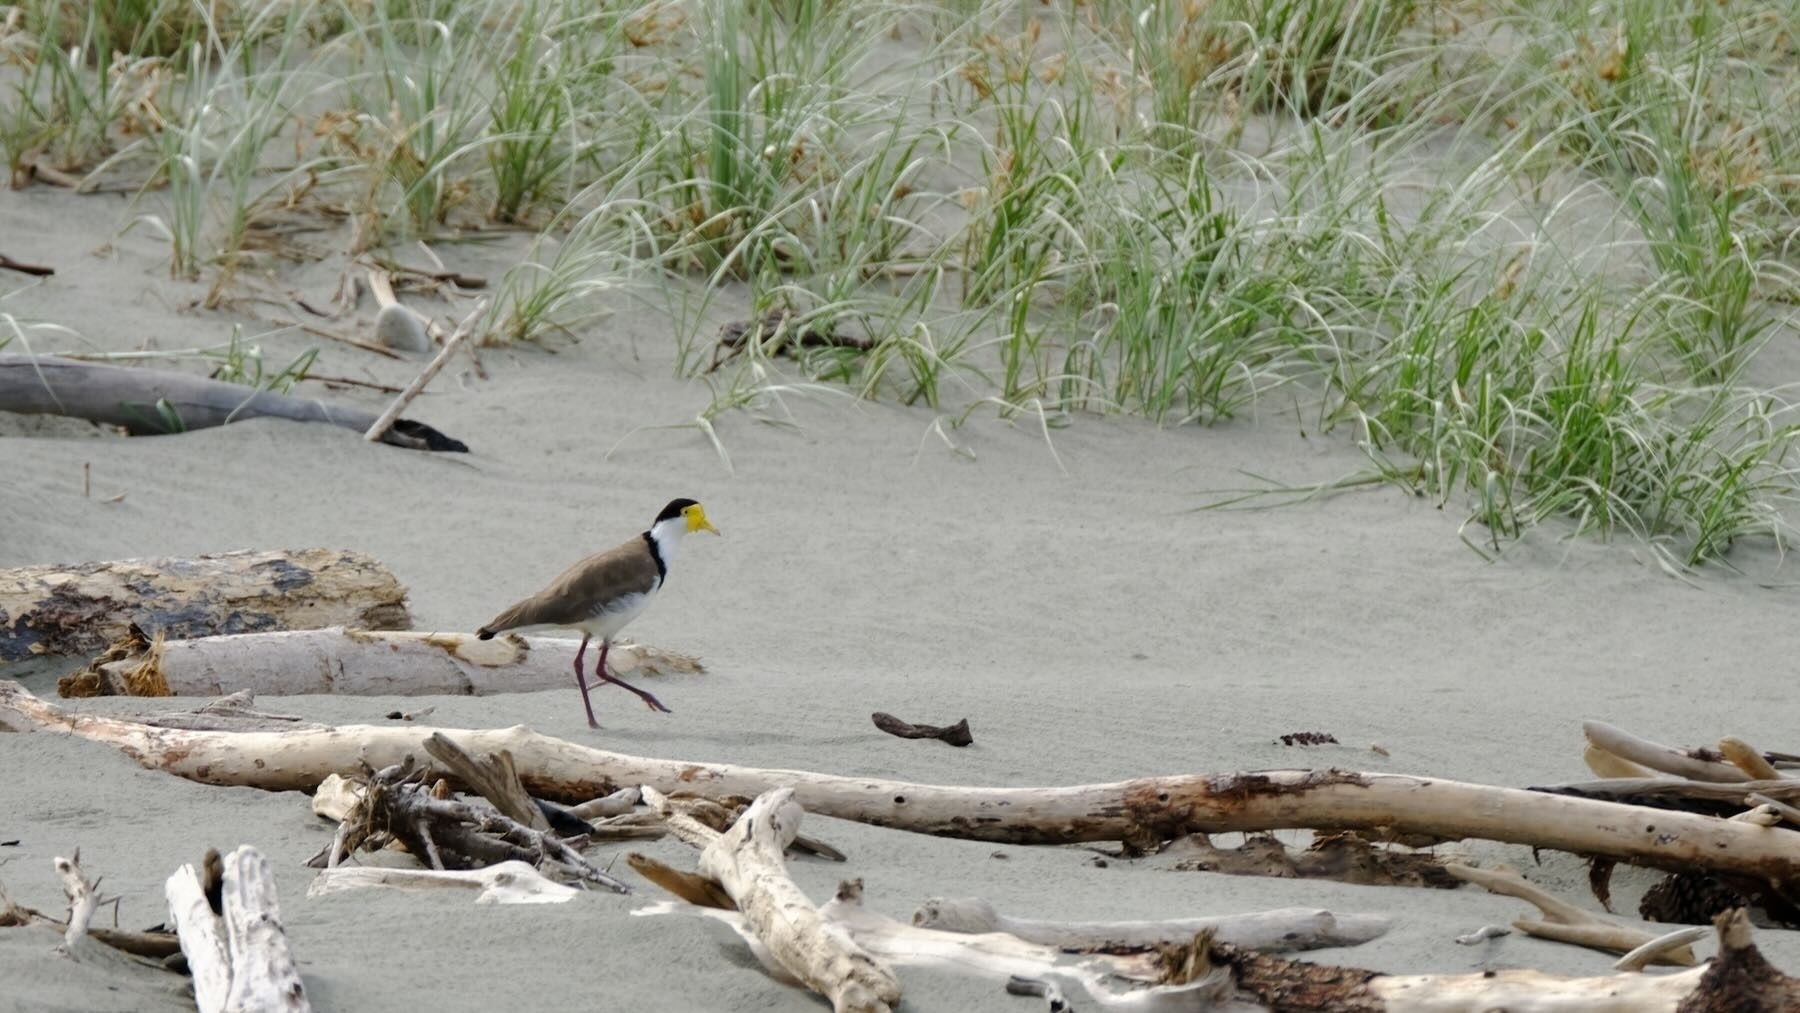 Medium sized bird with dark head and back, white underparts, amongst driftwood on sand near spinifex beach grasses. 